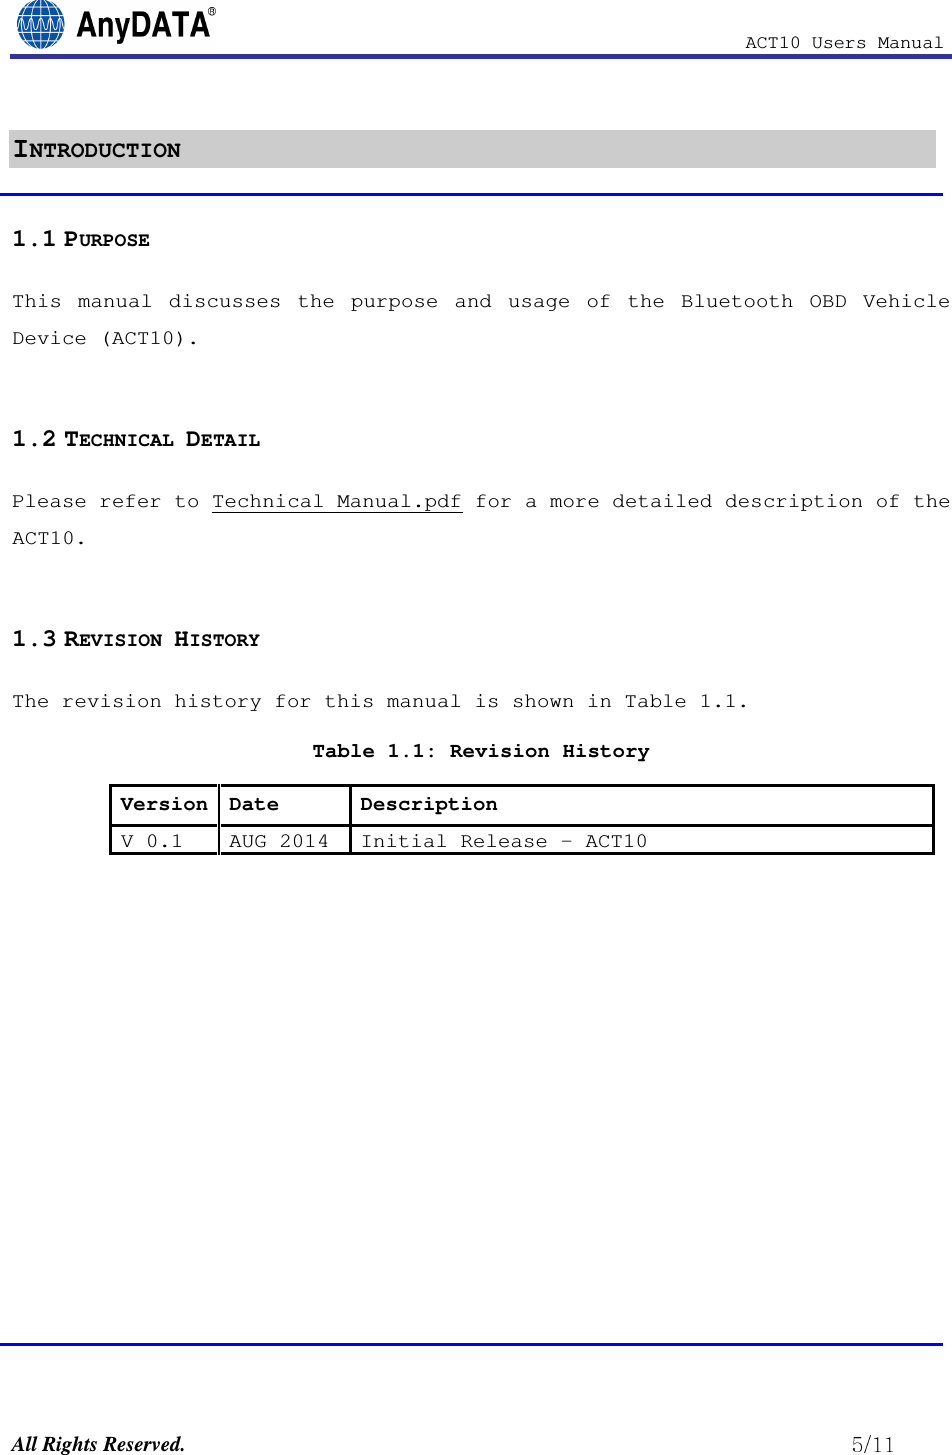                                                            ACT10 Users Manual  All Rights Reserved.                                                          INTRODUCTION 1.1 PURPOSE This  manual  discusses  the  purpose  and  usage  of  the  Bluetooth  OBD  Vehicle Device (ACT10).  1.2 TECHNICAL DETAIL Please refer to Technical Manual.pdf for a more detailed description of the ACT10.  1.3 REVISION HISTORY The revision history for this manual is shown in Table 1.1.  Table 1.1: Revision History Version Date  Description V 0.1 AUG 2014 Initial Release – ACT10              